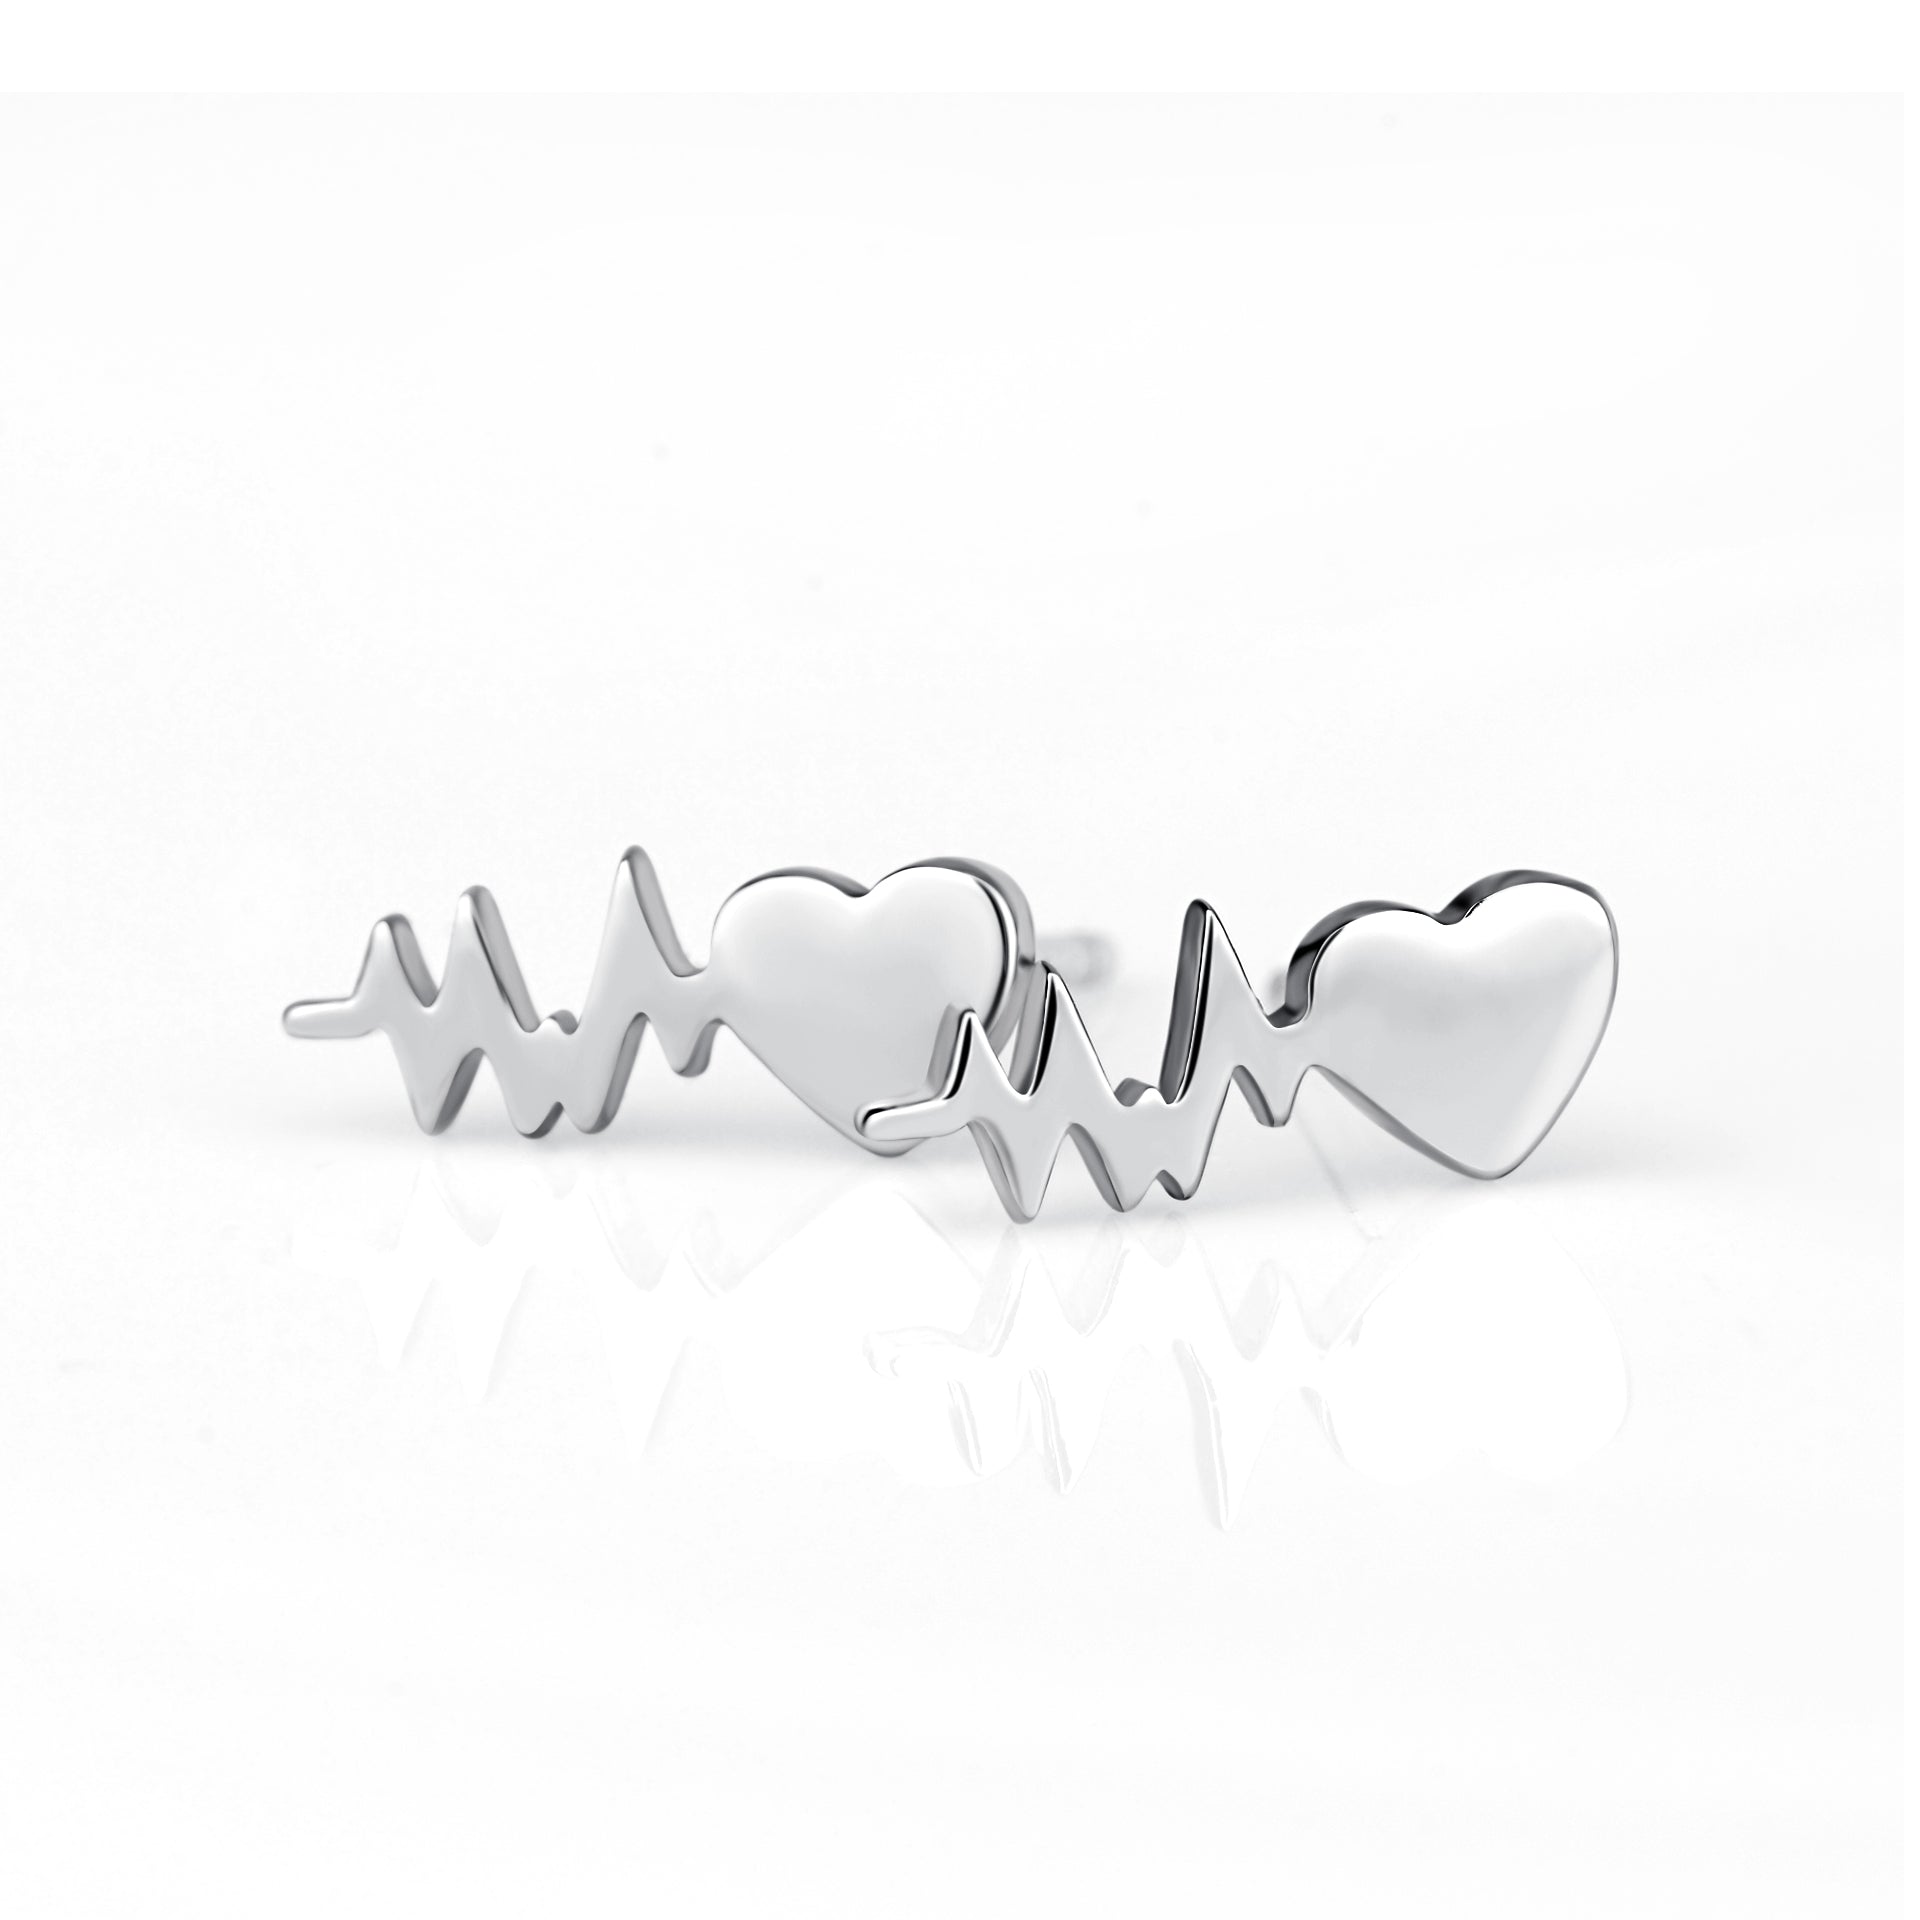 A Stunned Heart-shaped Figure Earrings, a Stud, Gift from a Man to a Girlfriend